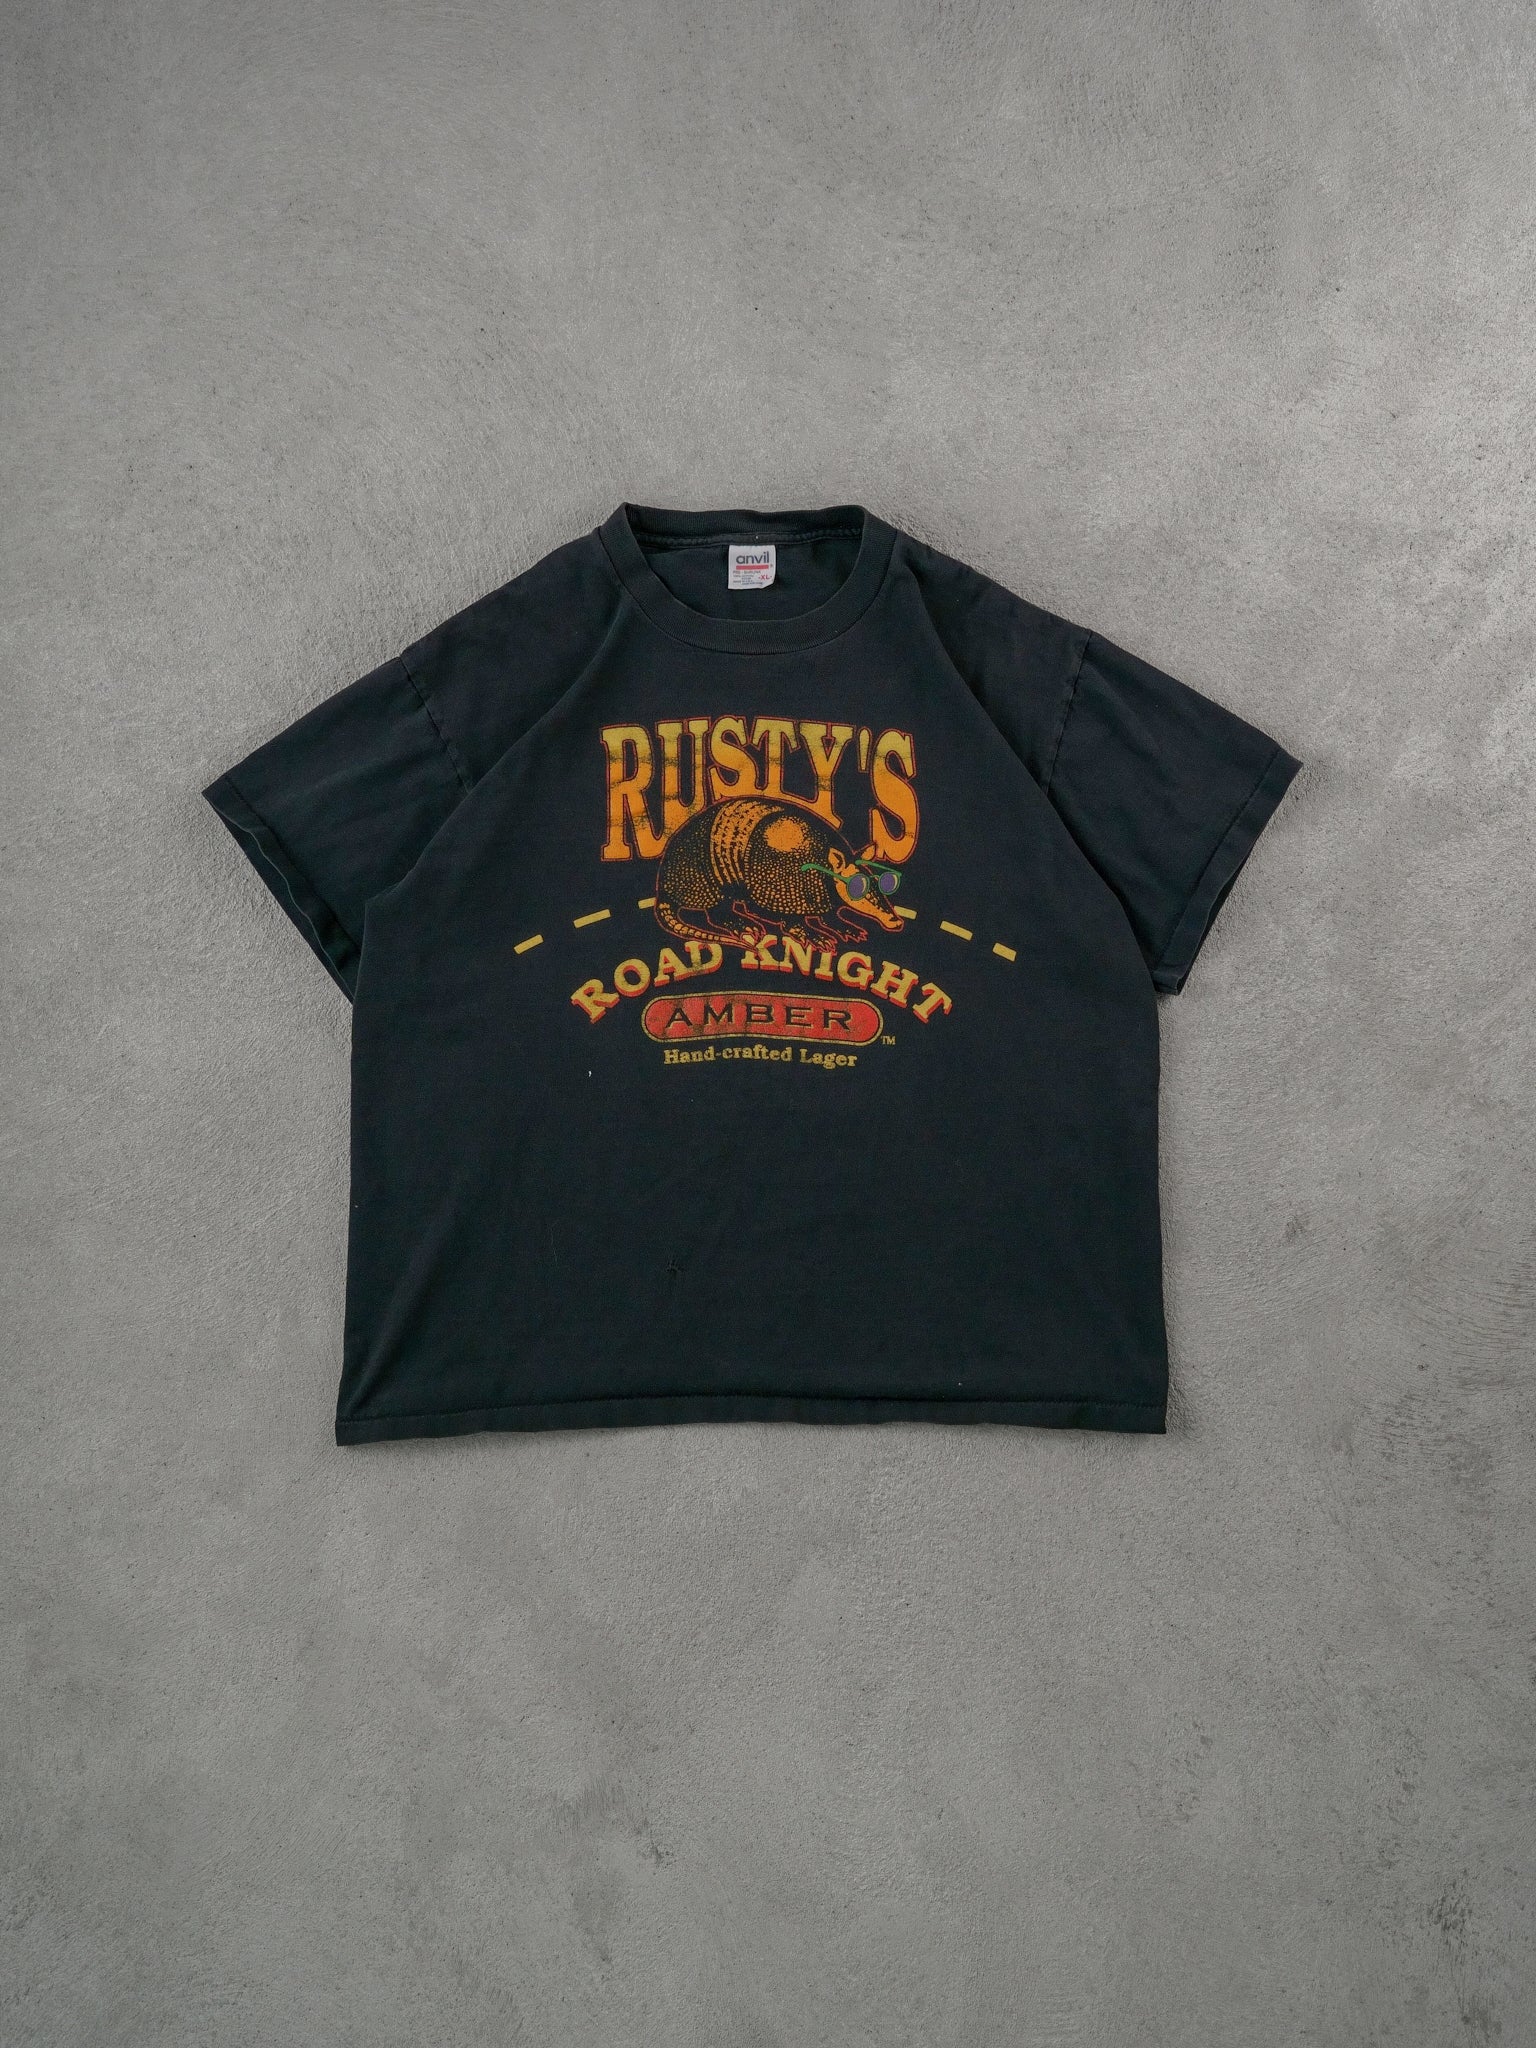 Vintage 90s Black Rusty's Handcrafted Lager Graphic Tee (M)